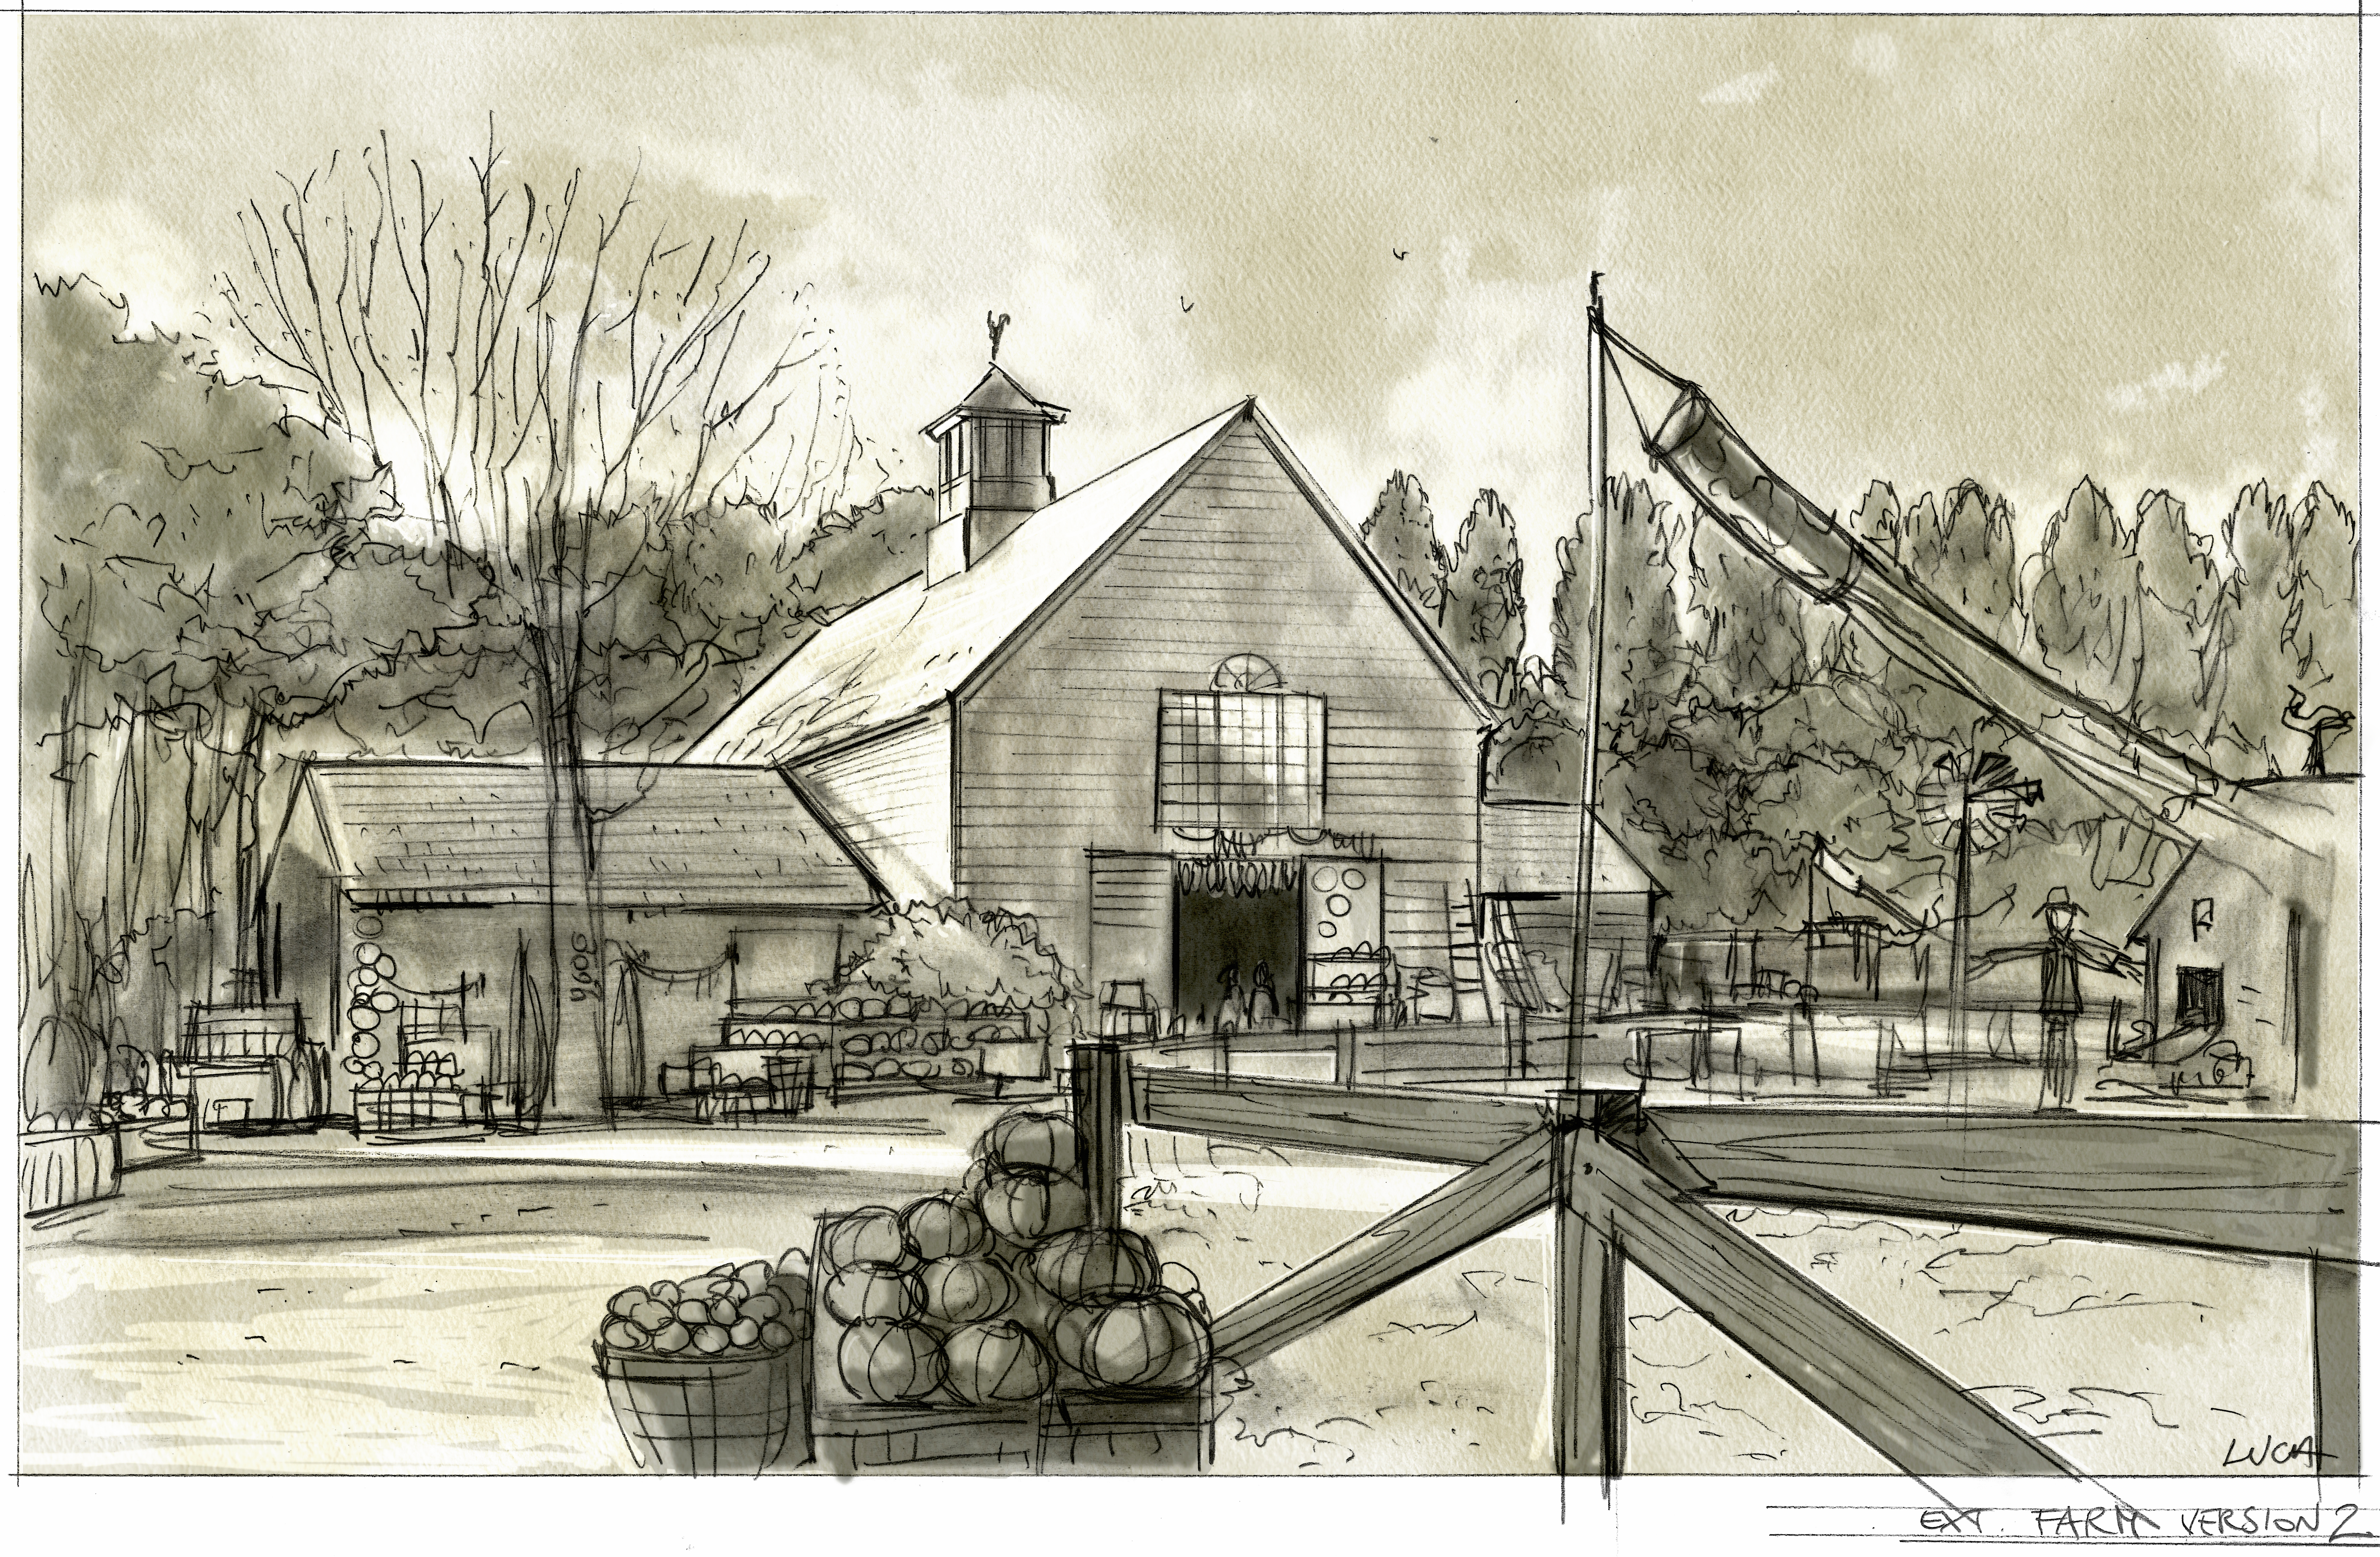 UNFINISHED BUSINESS - Directed by Ken Scott - Production Design by Luca Tranchino - Ext. Farm, Sketch by Luca Tranchino - ©2015 - New Regency Pictures